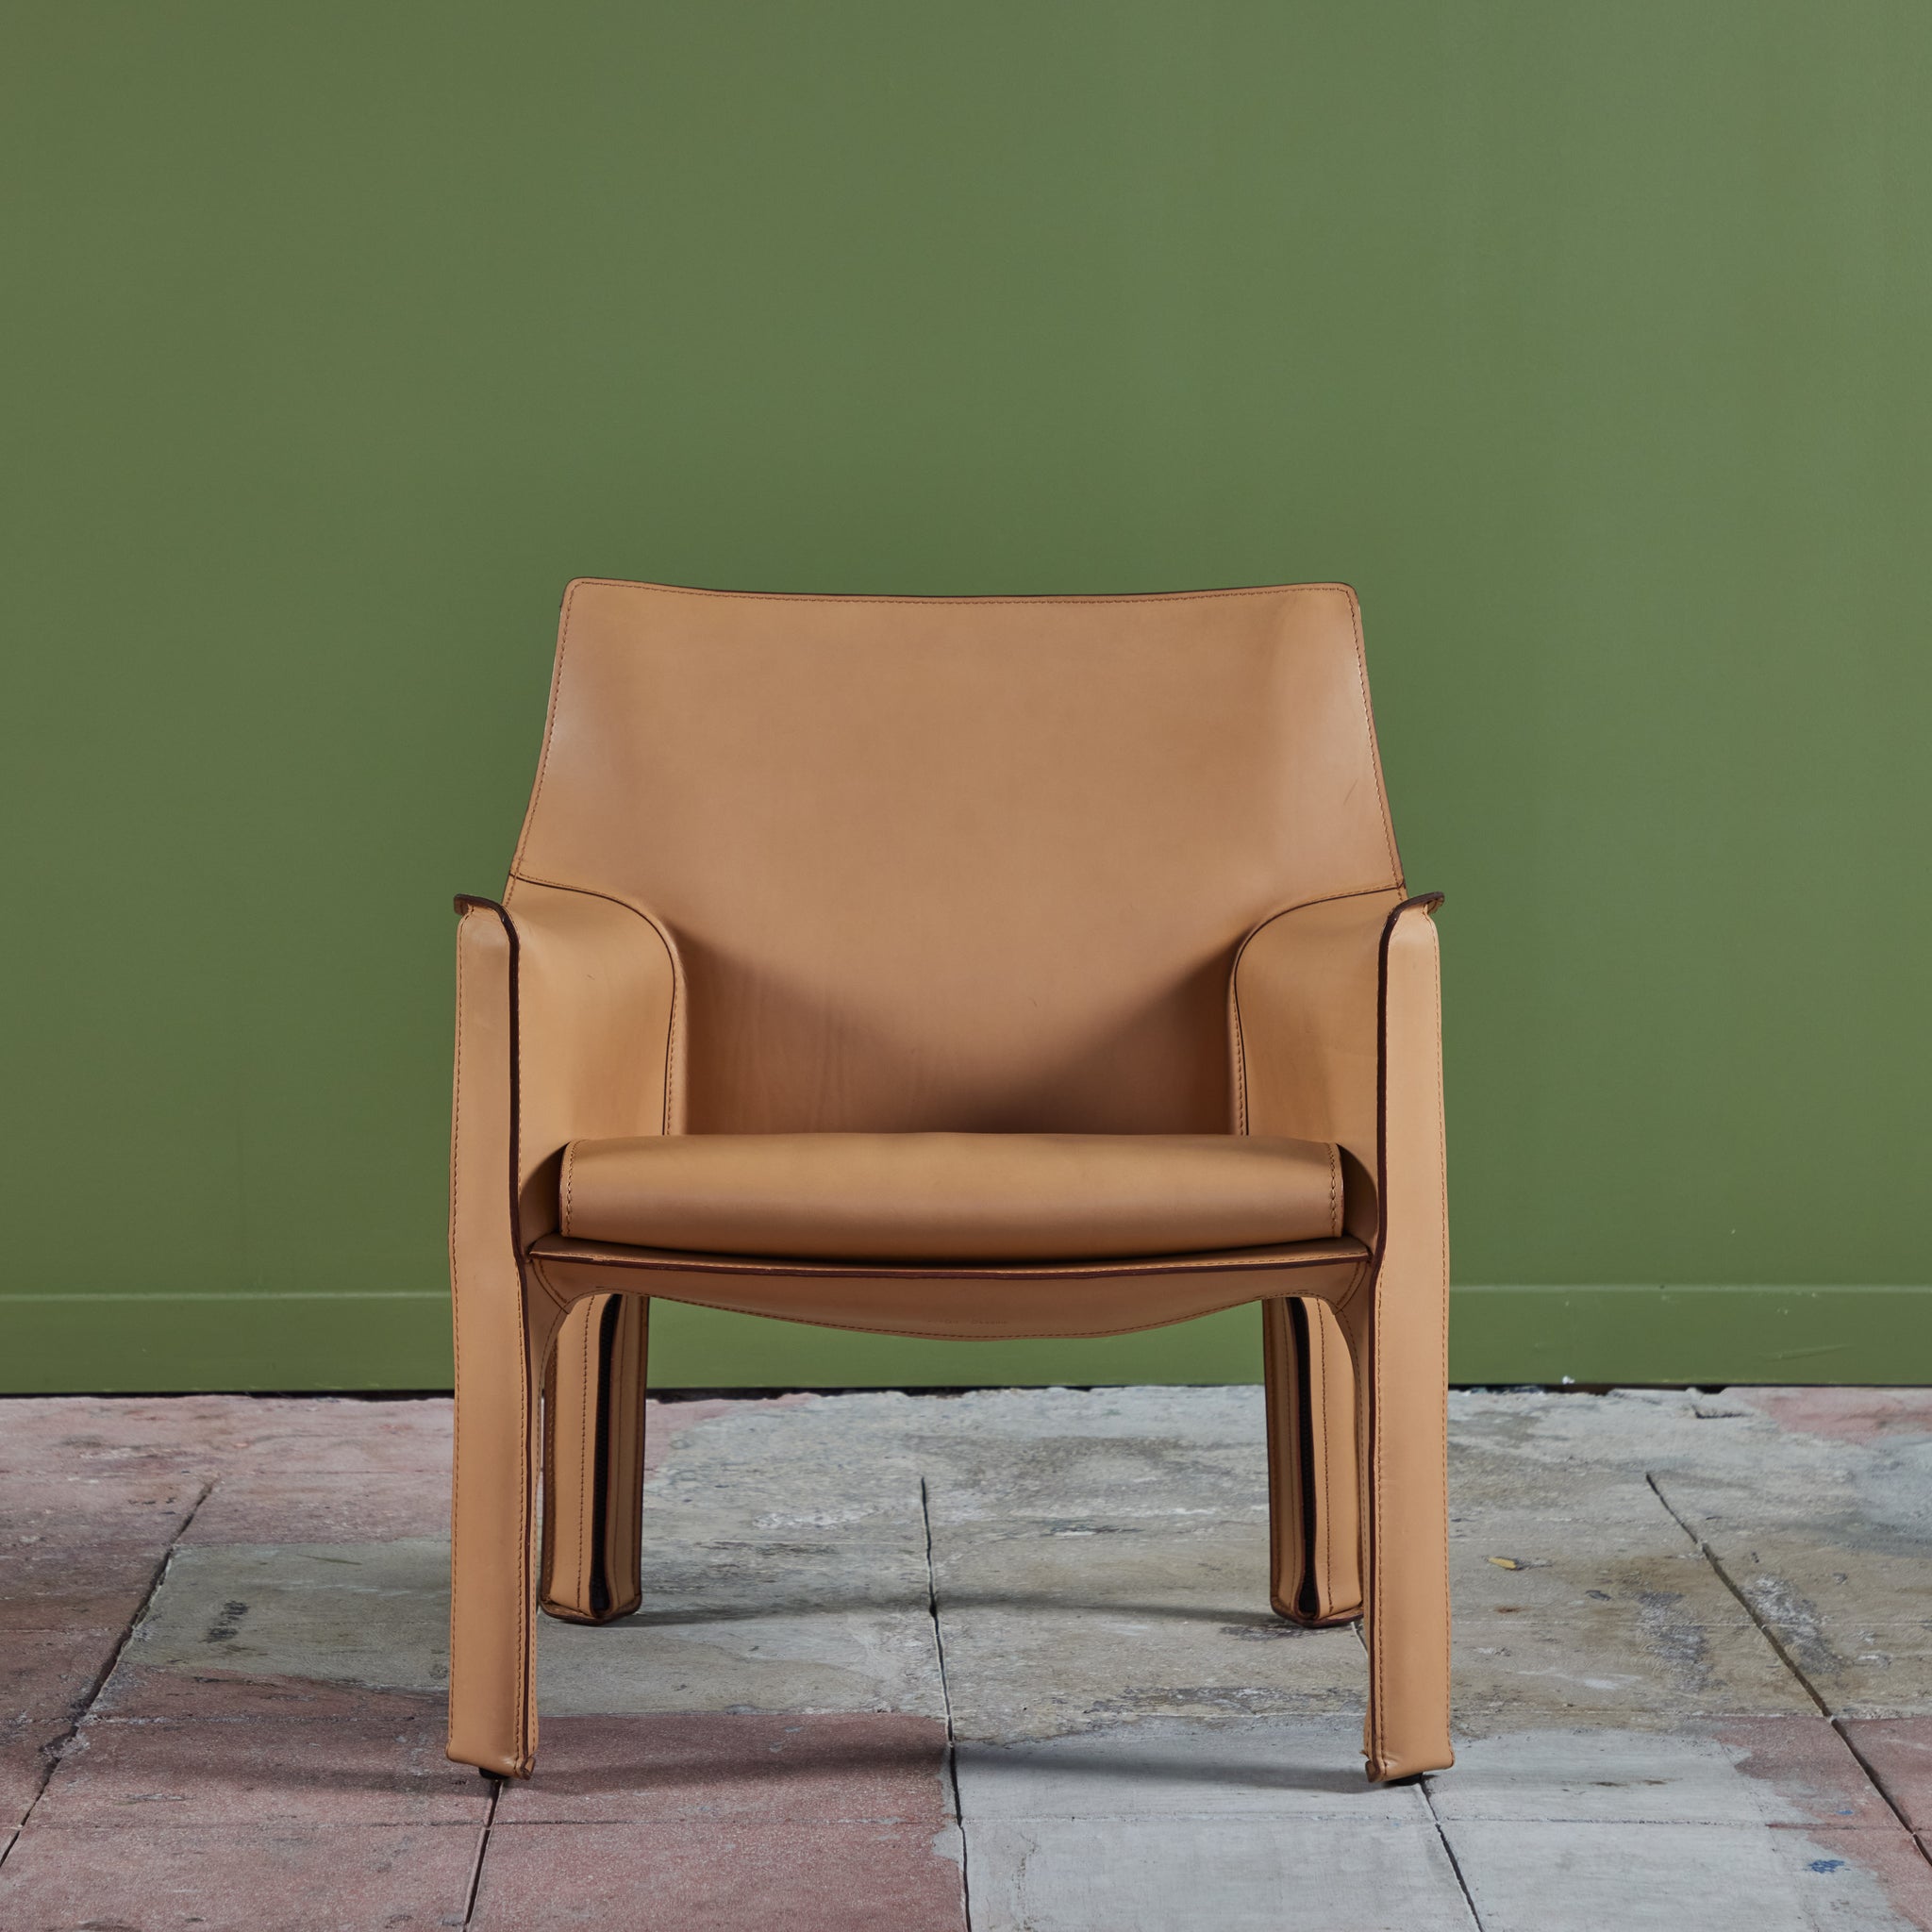 Mario Bellini Cab Lounge Chair for Cassina